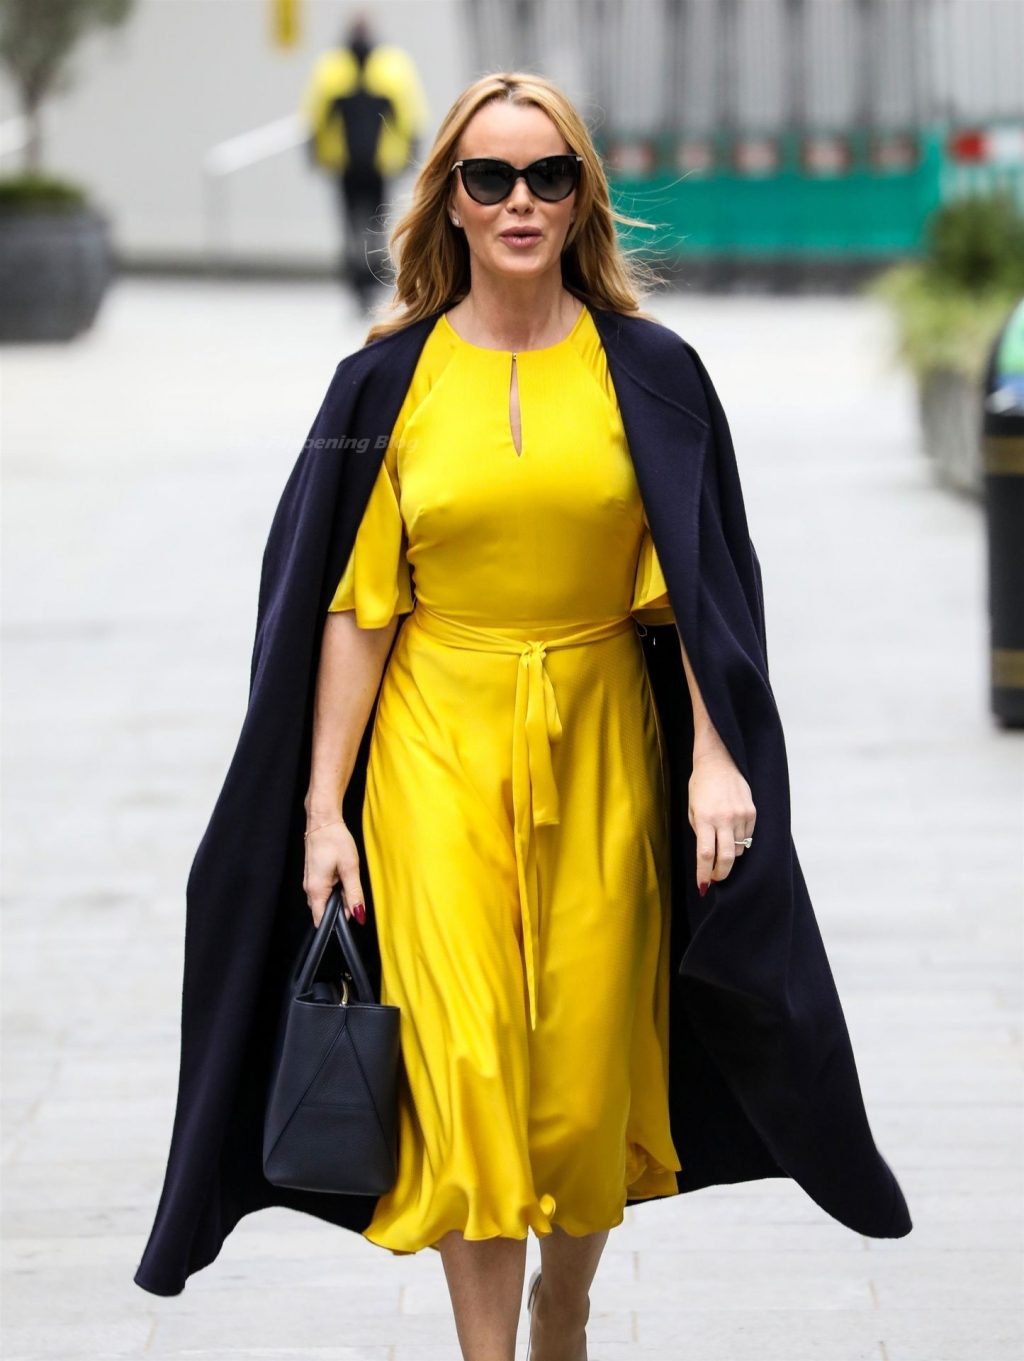 Amanda Holden is Pictured Leaving the Global Radio Studios (95 Photos)